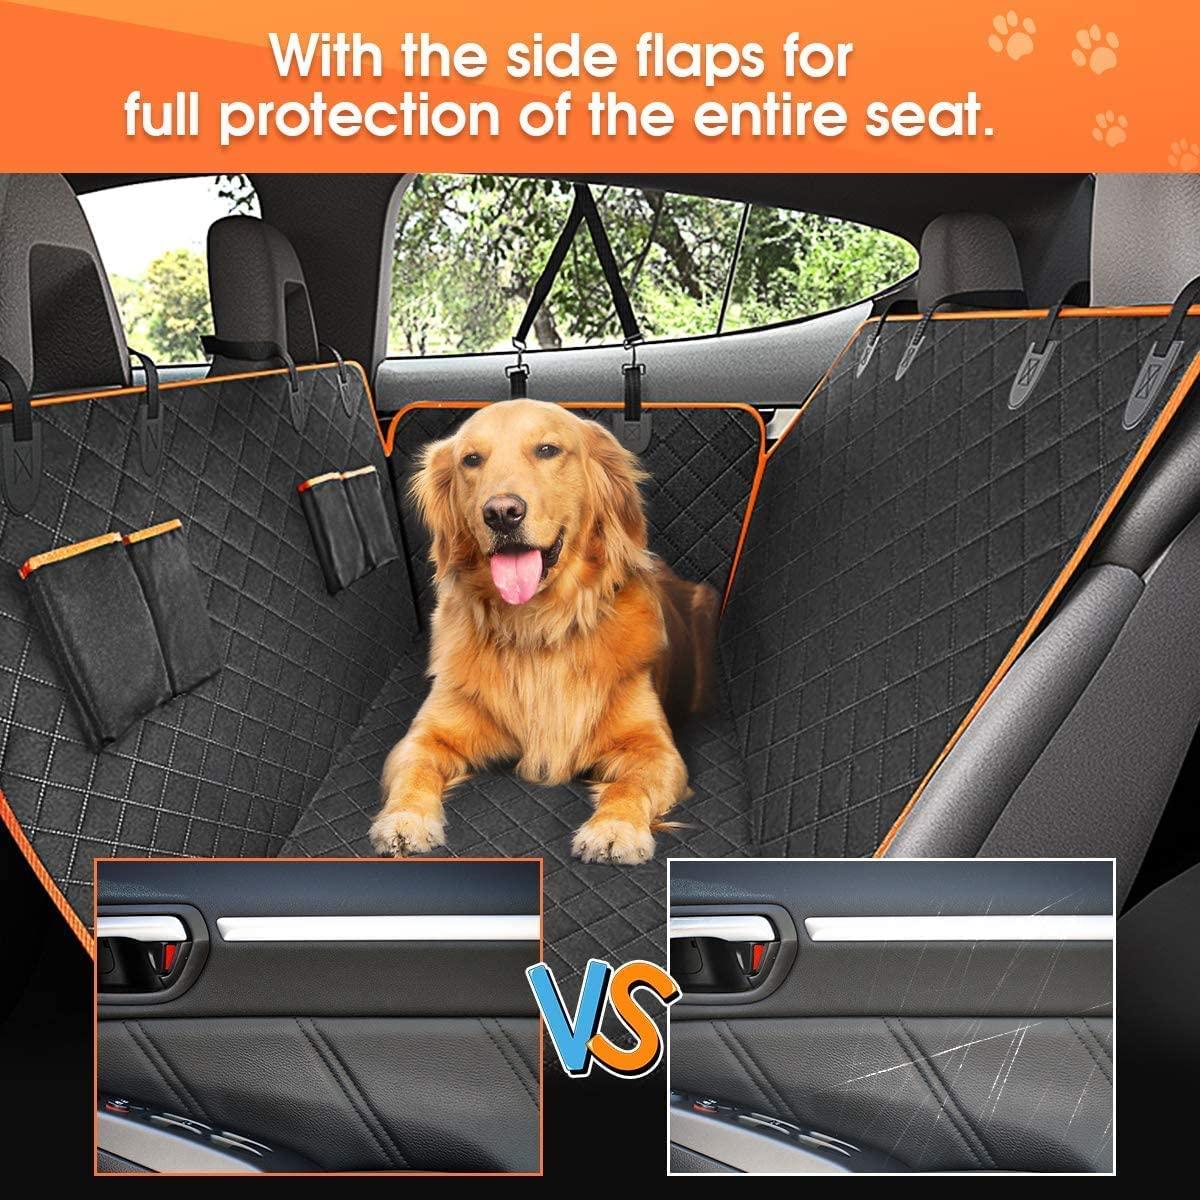 Kinglyday Dog Car Seat Cover for Back Seat, Waterproof Seat Protector Scratchproof Pet Hammock with 4 Bags Side Flaps, Washable Nonslip Backseat Protection for Cars Trucks and SUVs - KinglyDay